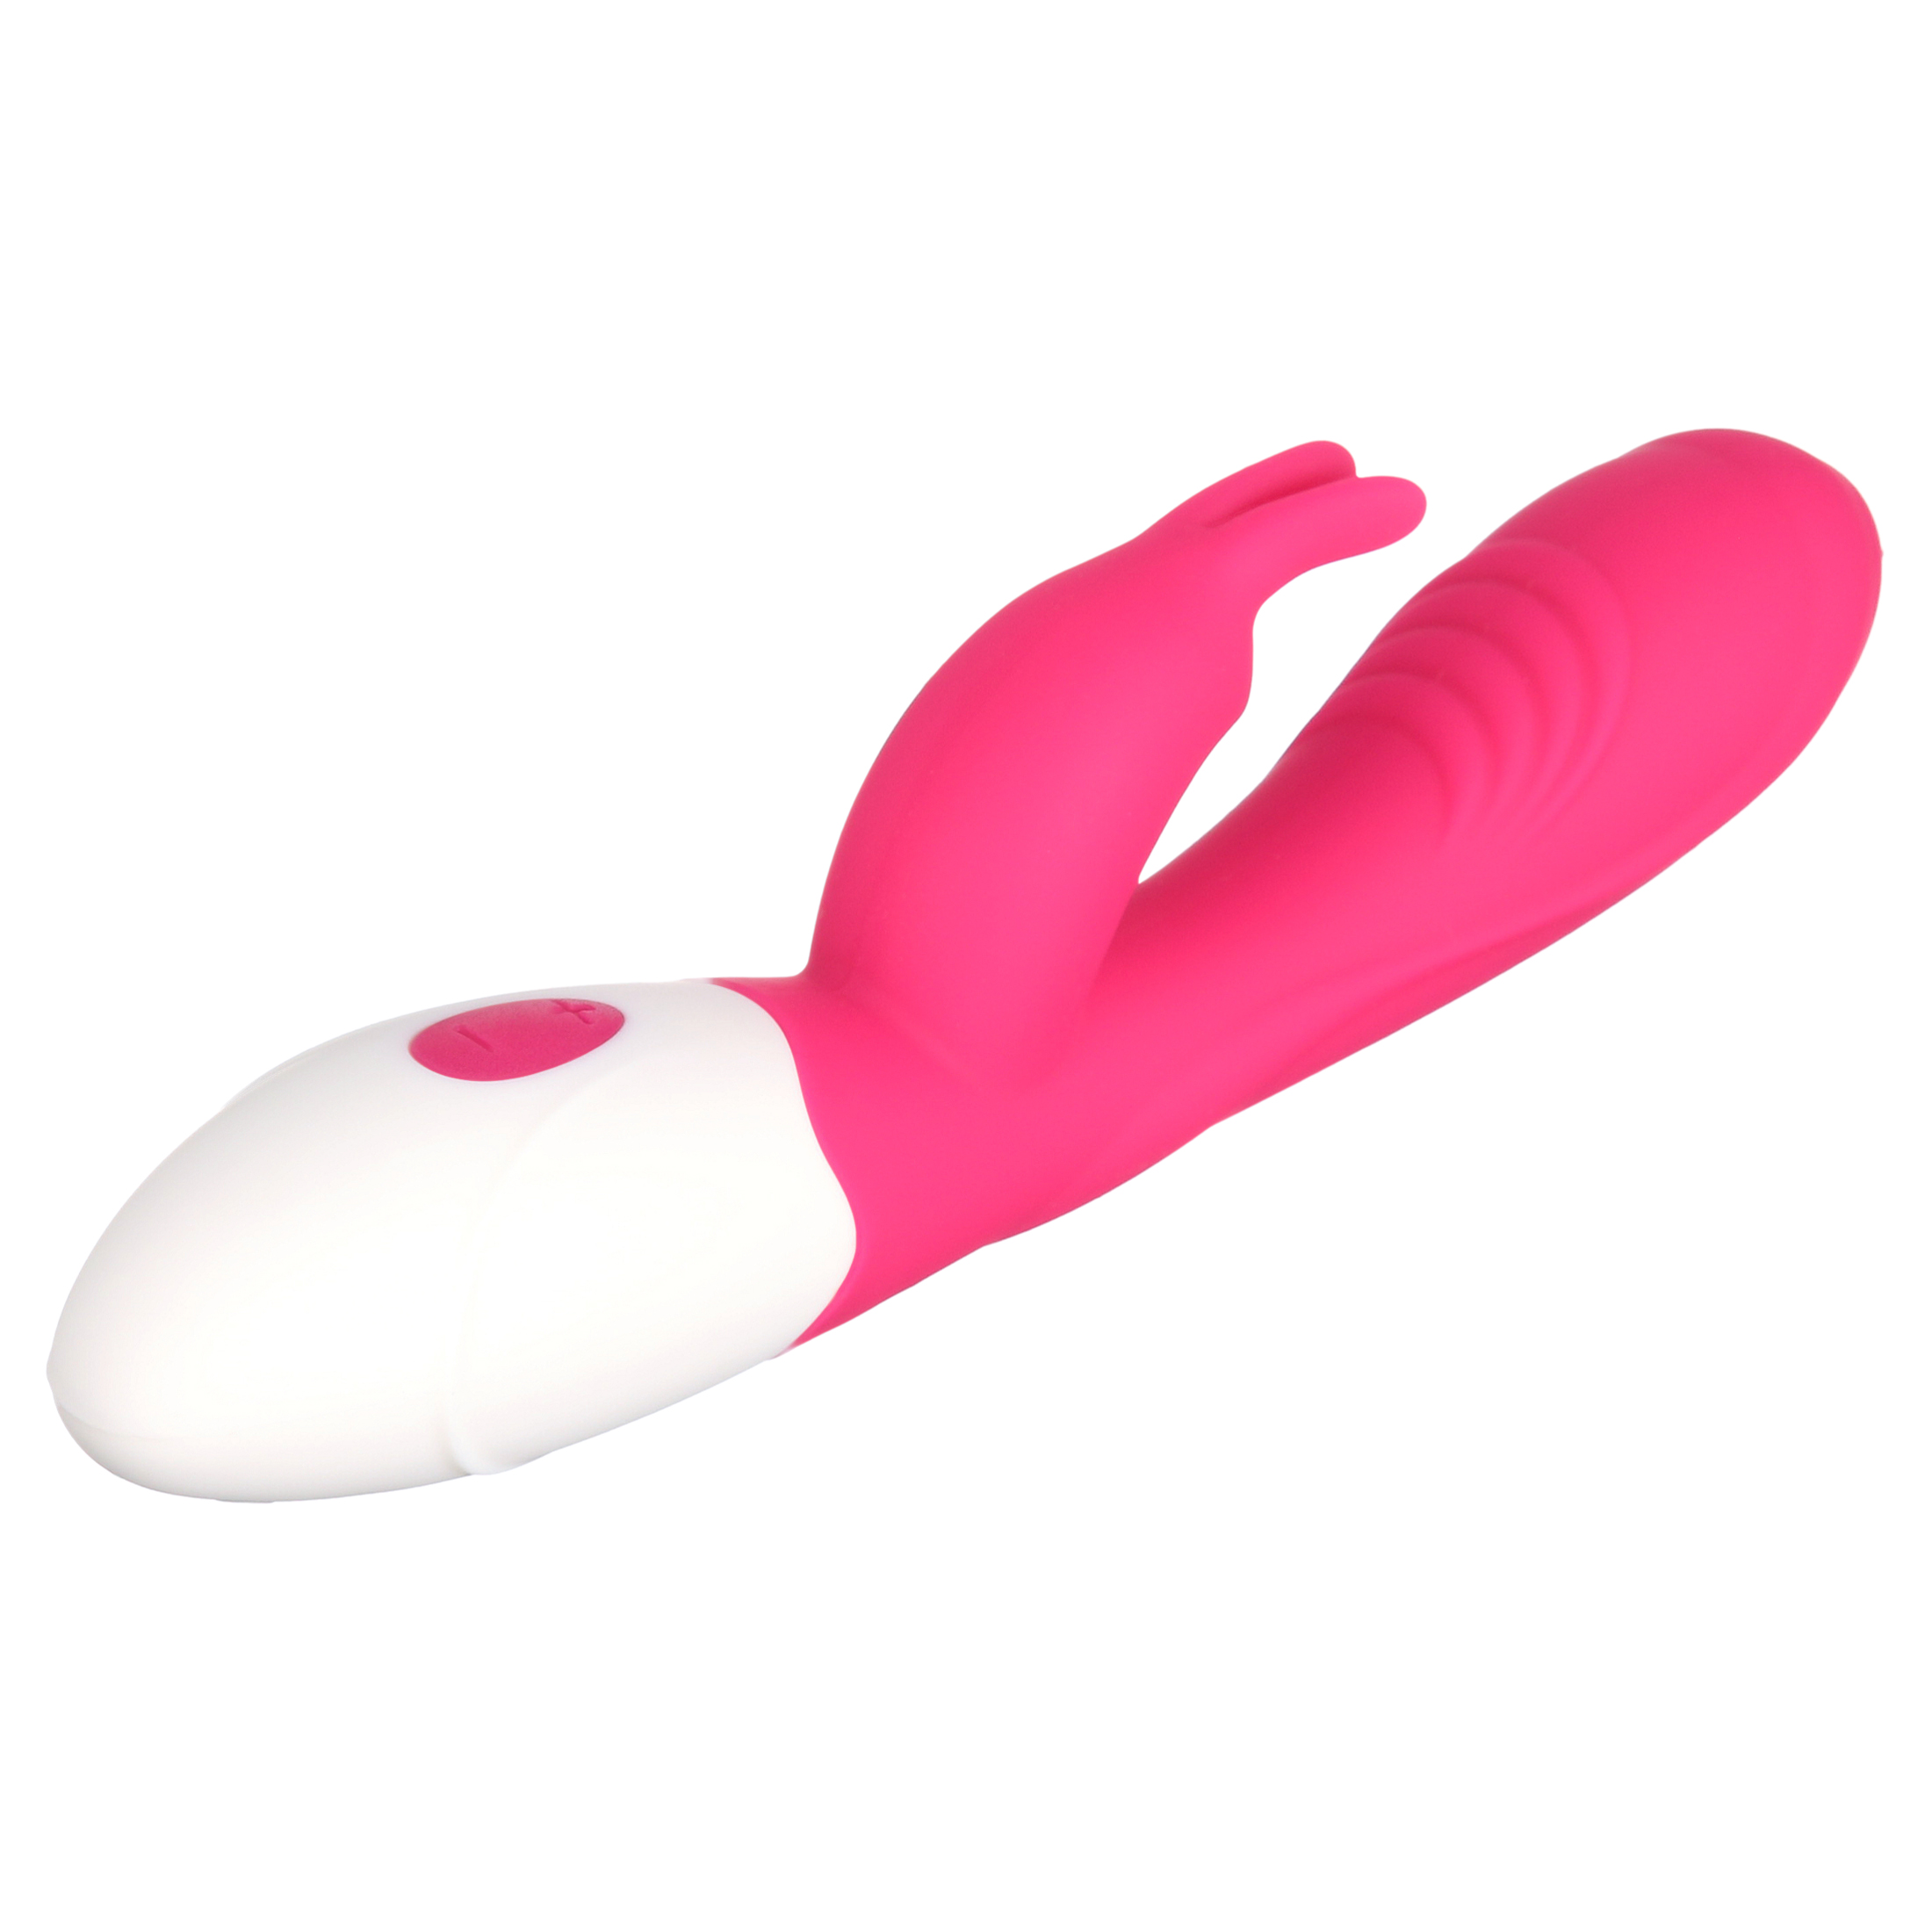 Rabbit Lily Vibrator Dual Pleasure G-Spot and Clitoral Waterproof Stimulator by Better Love - image 3 of 5